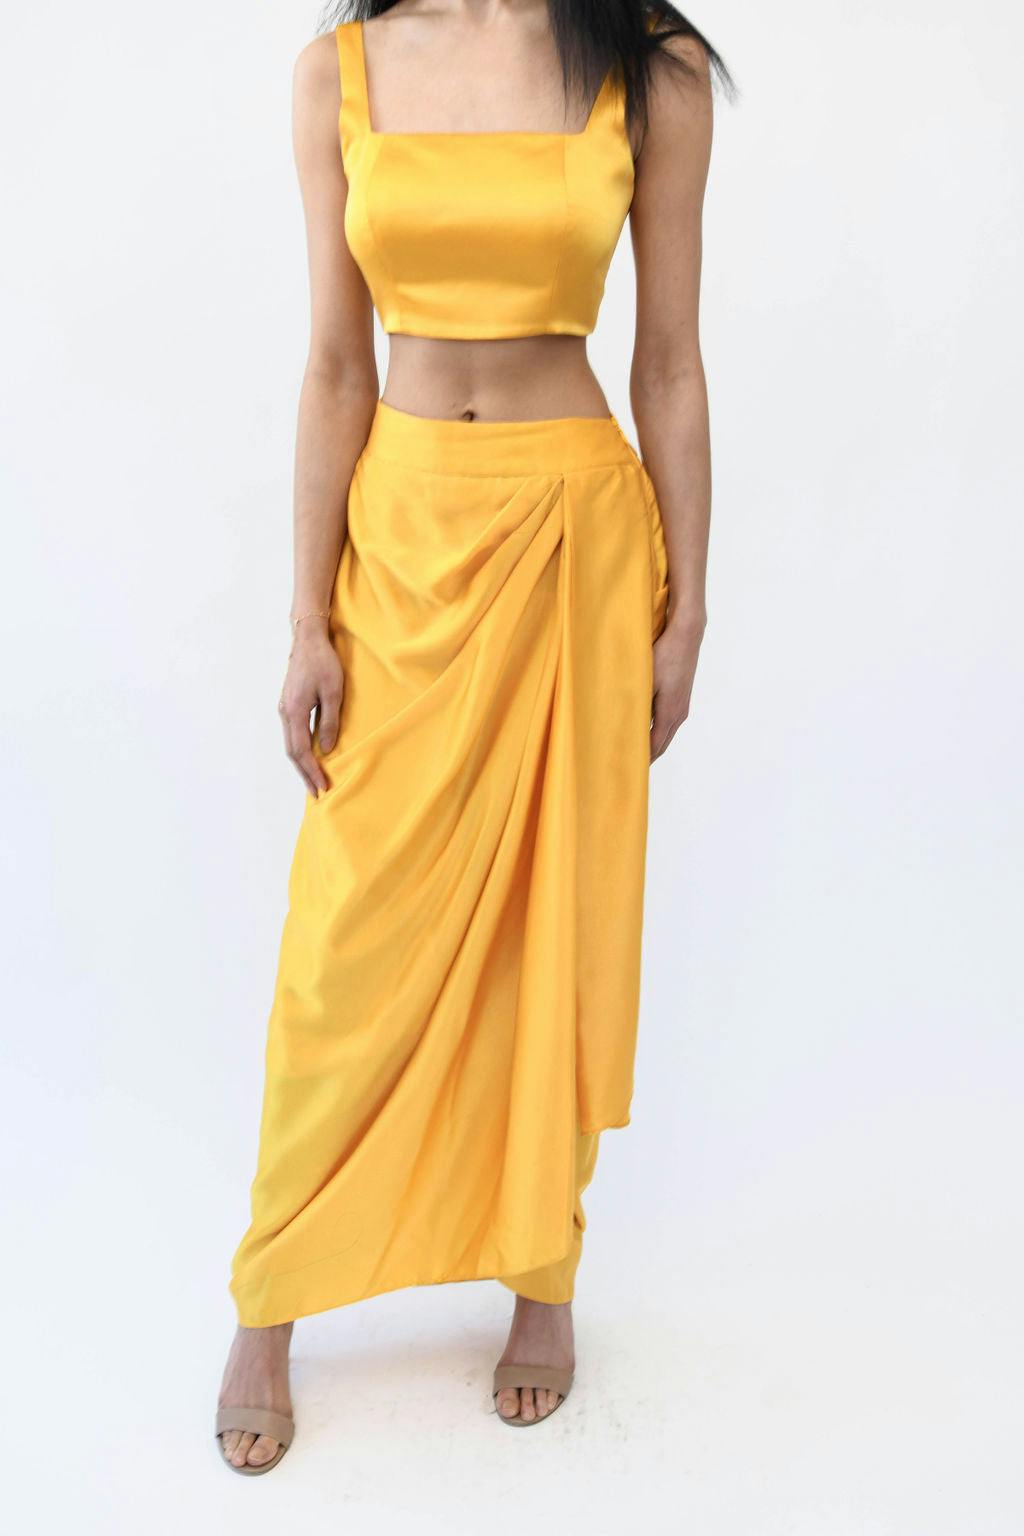 Mango Satin Drape Skirt, a product by MOR Collections